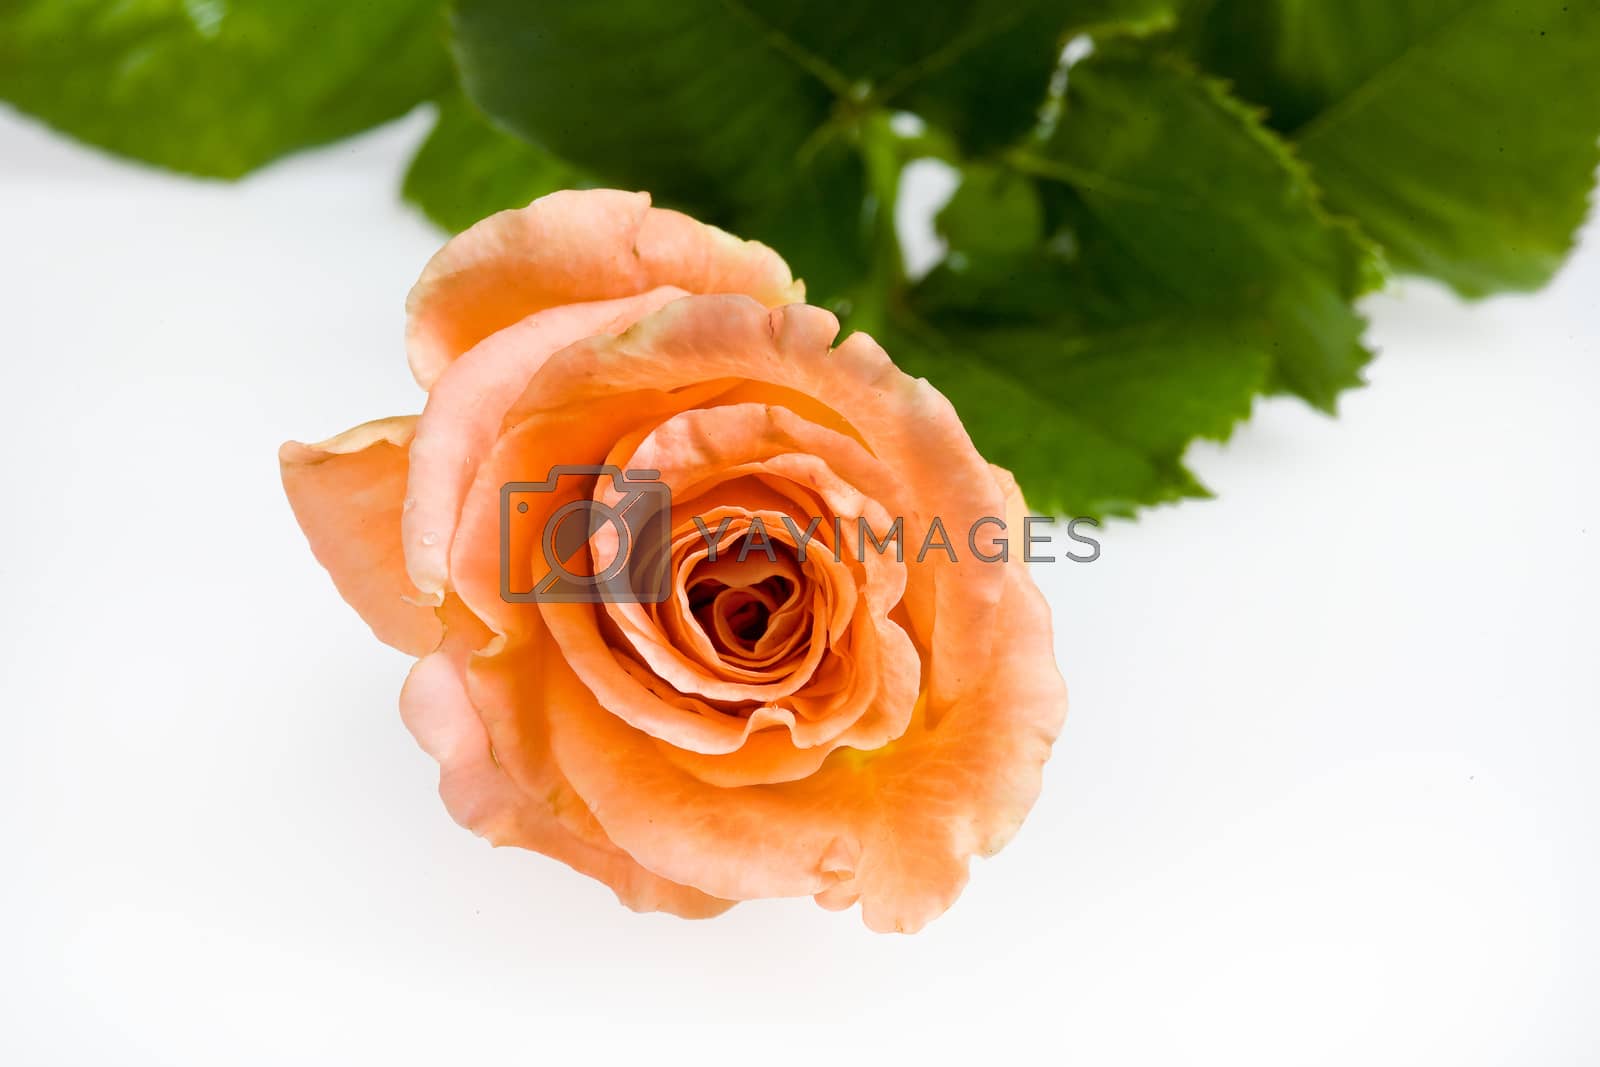 Royalty free image of Flowers by Fotoskat